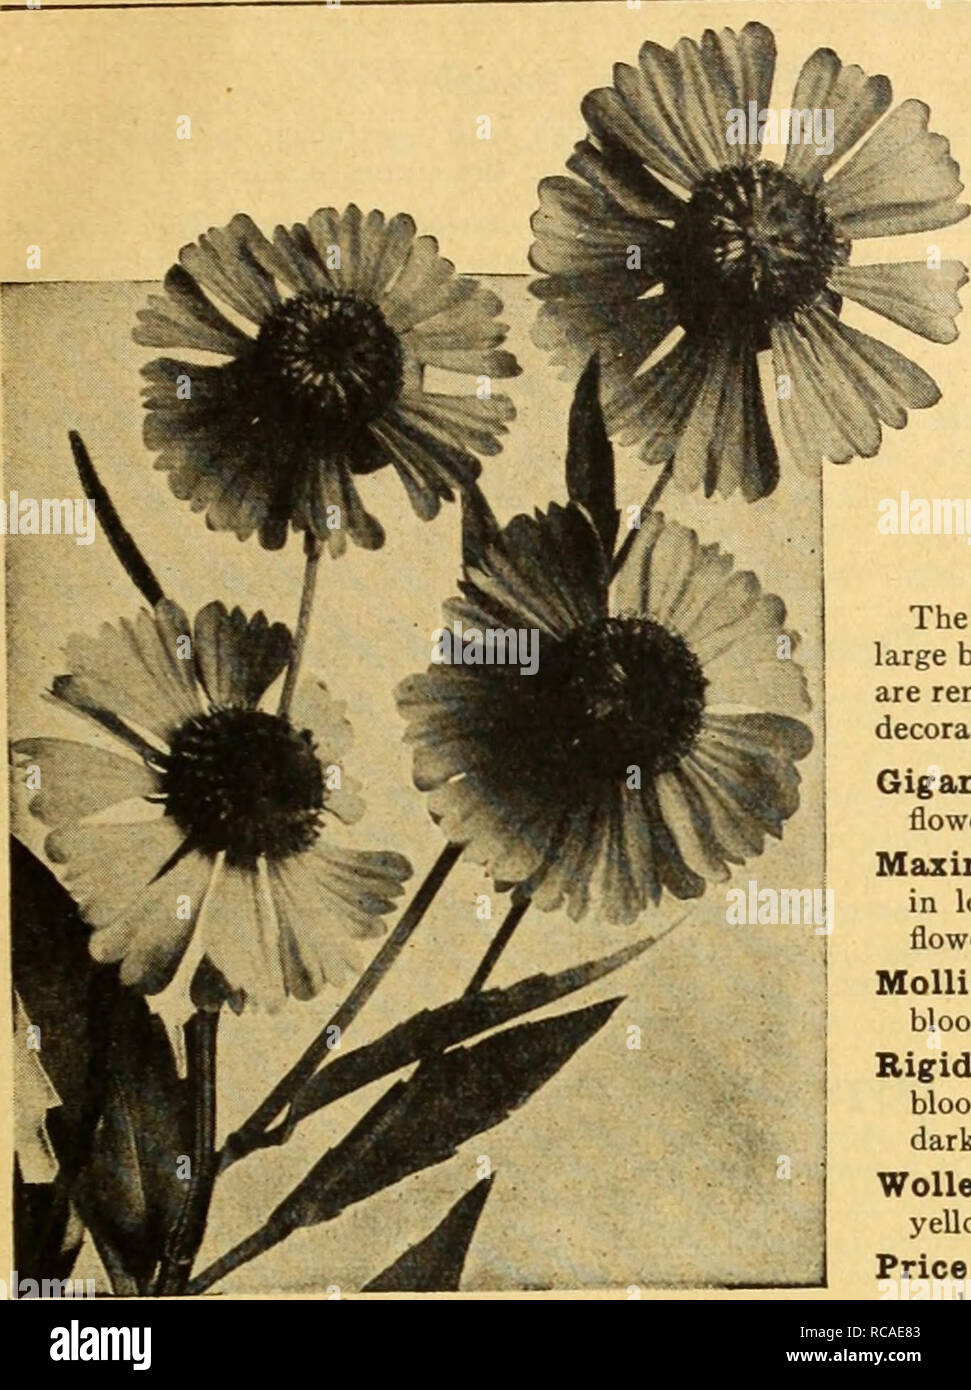 . Dreer's autumn catalogue 1926. Bulbs (Plants) Catalogs; Flowers Seeds Catalogs; Gardening Equipment and supplies Catalogs; Nurseries (Horticulture) Catalogs; Vegetables Seeds Catalogs. /flEI11iyAlMSiM!idiO&amp;llilfeU^Mik#gâ¢i^ 41. Helianthemum (Rock, or Sun Rose) Exceedingly pretty low growing evergreen plants, forming' broad clumps, and which during their flowering season, Jime to' July, are quite hidden by a mass of bloom; well adapted for the front of the border, the rockery, or a dry sunny bank. - Fireball. Fiery double red. Mrs. Earle. Rich single red. Macranthum. Single white. Praecox Stock Photo